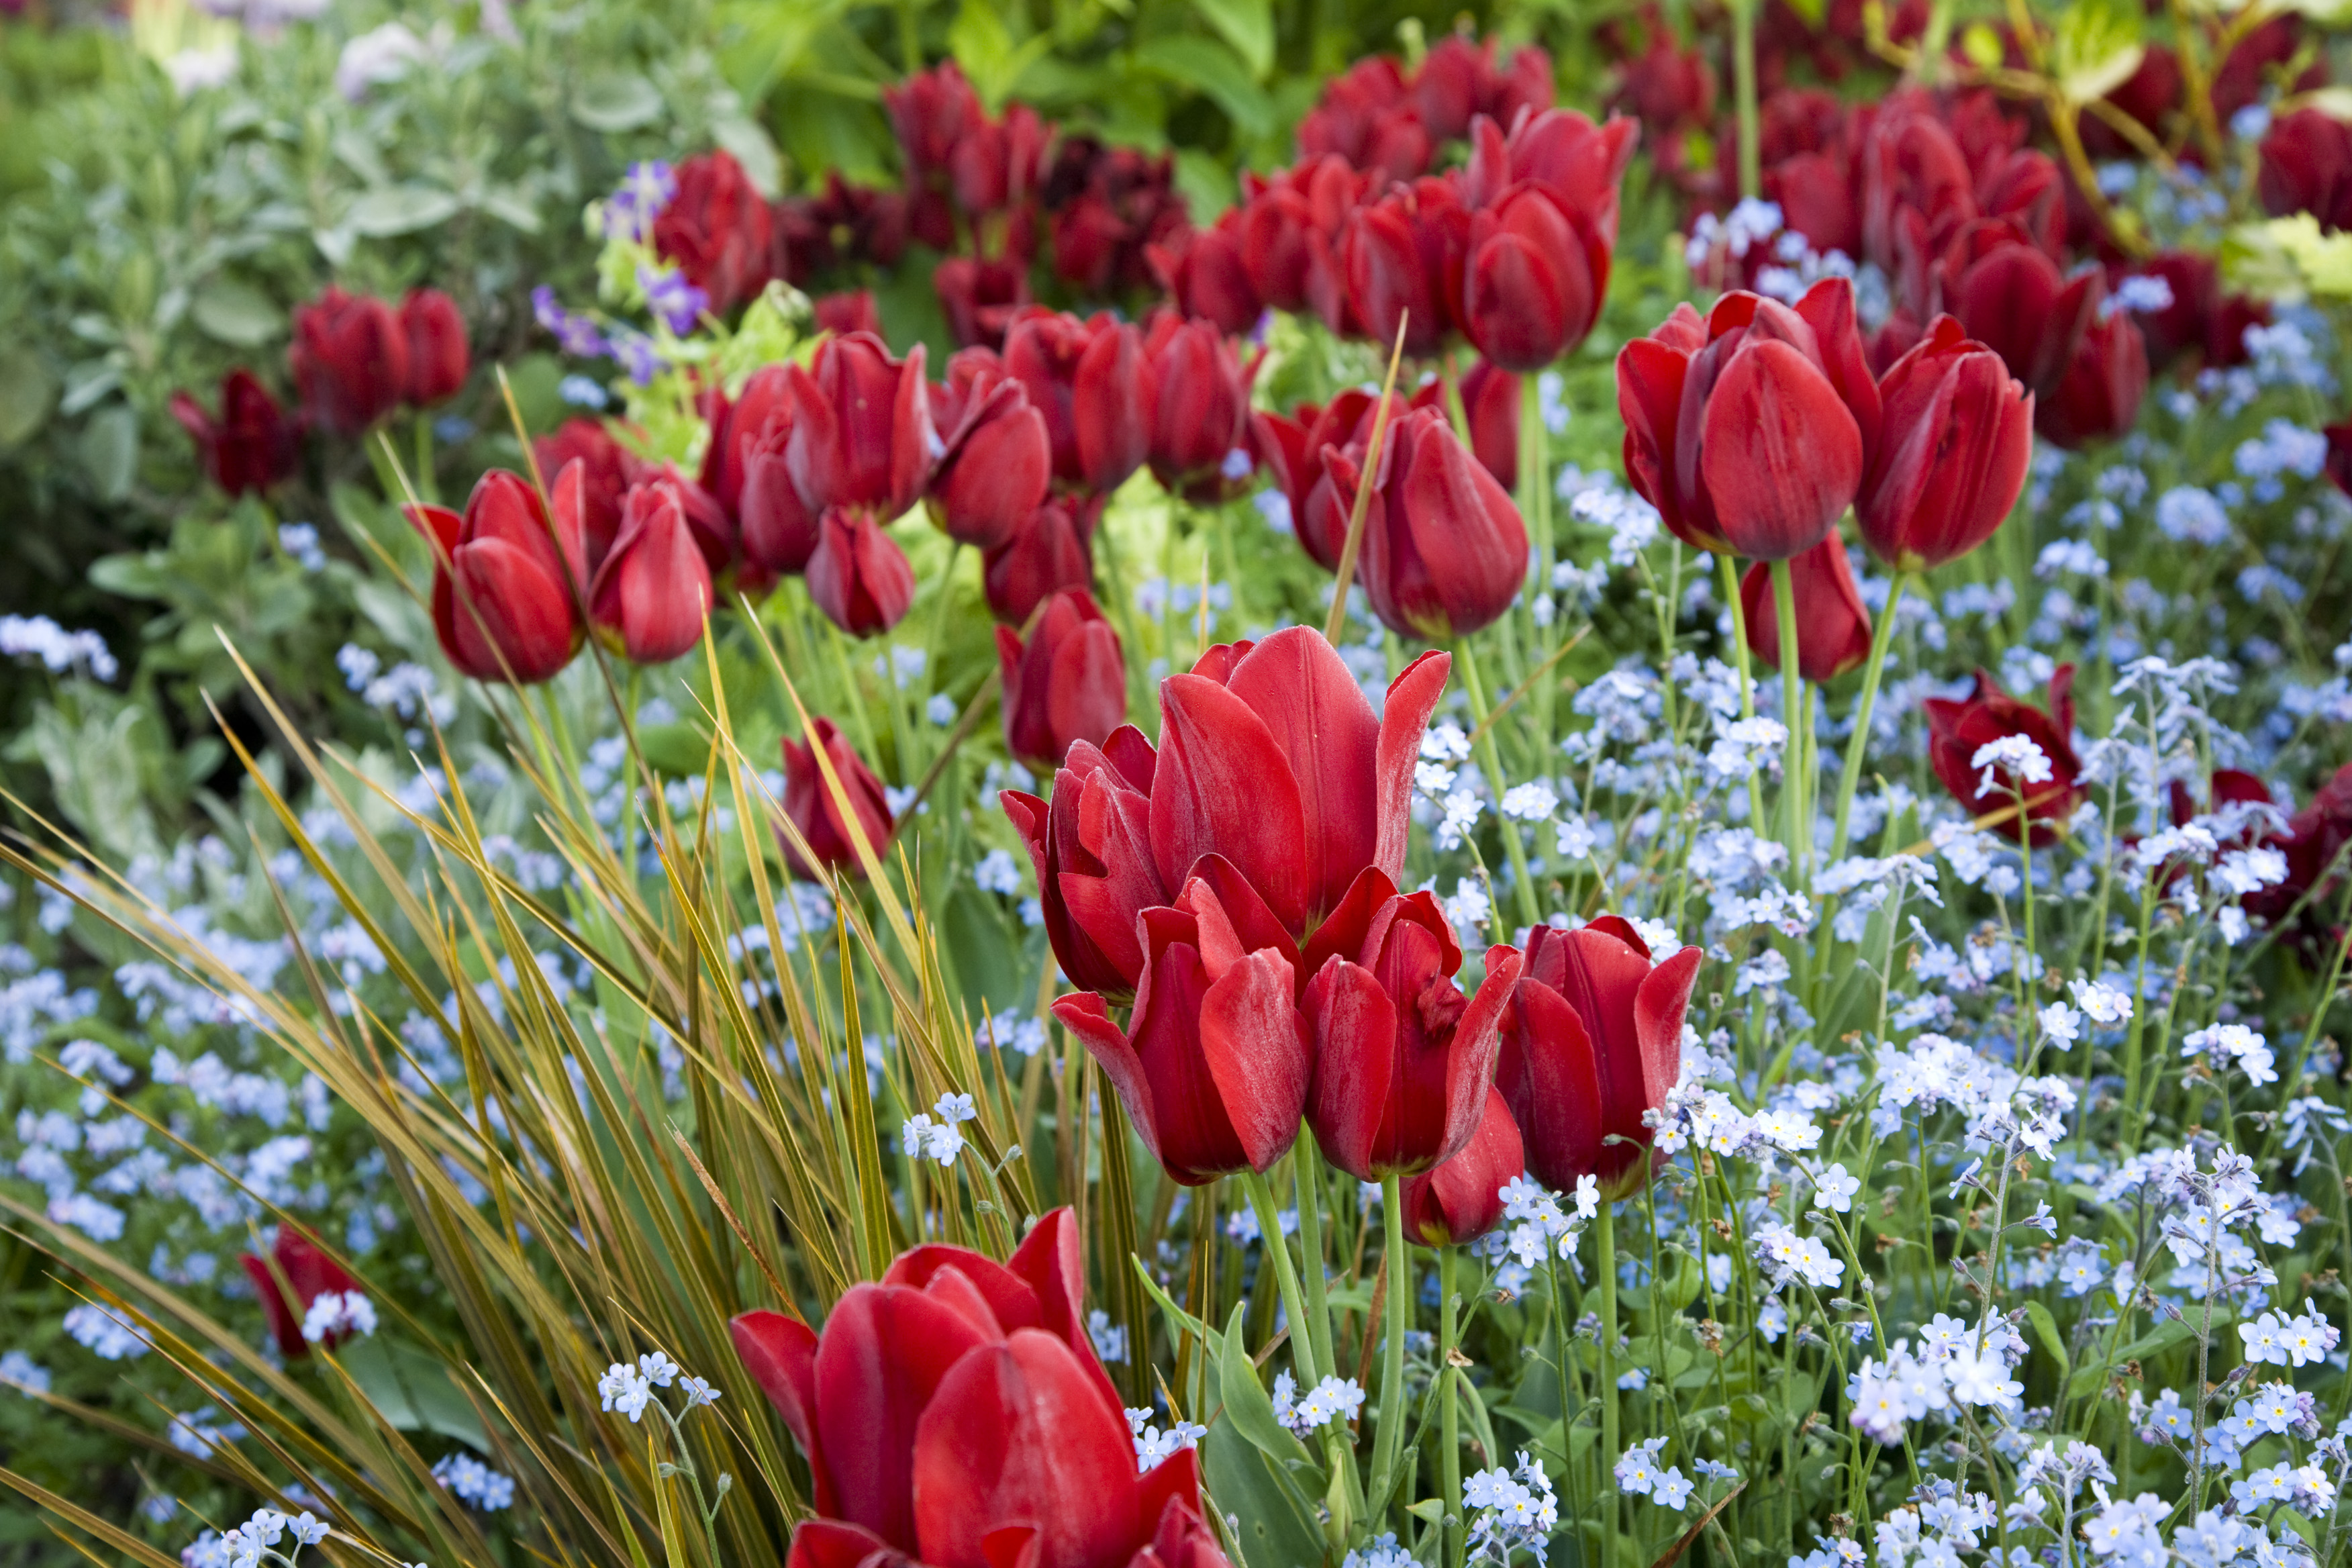 Tulips at Great Dixter (Andrew Lawson/Great Dixter/National Garden Scheme/PA)